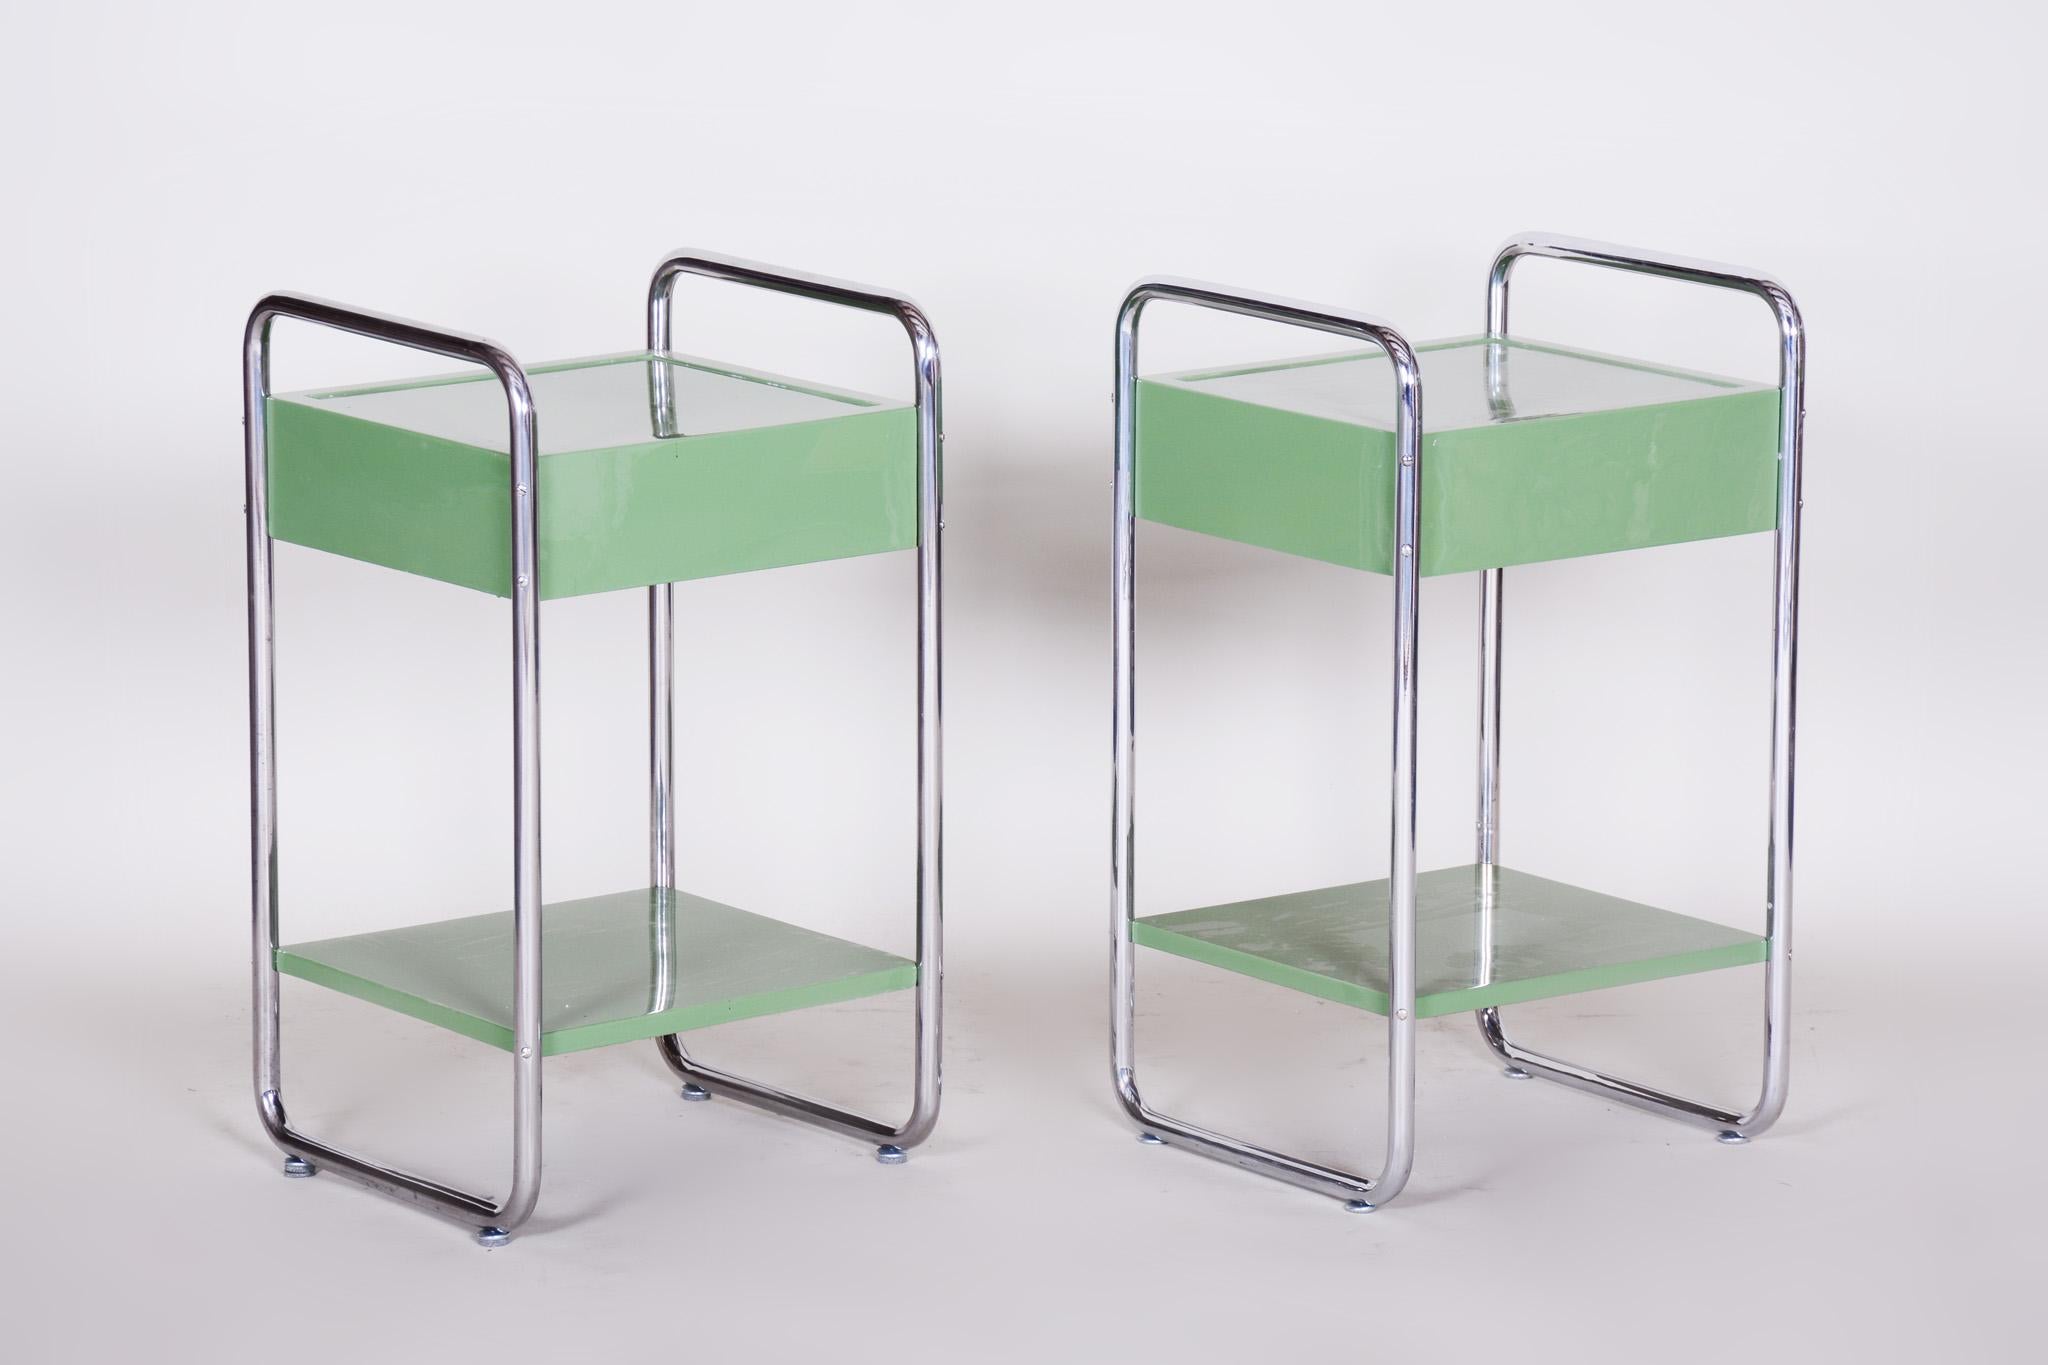 Restored Bauhaus Pair of Bed-Side Tables, Chrome-Plated Steel, Czech, 1930s For Sale 15